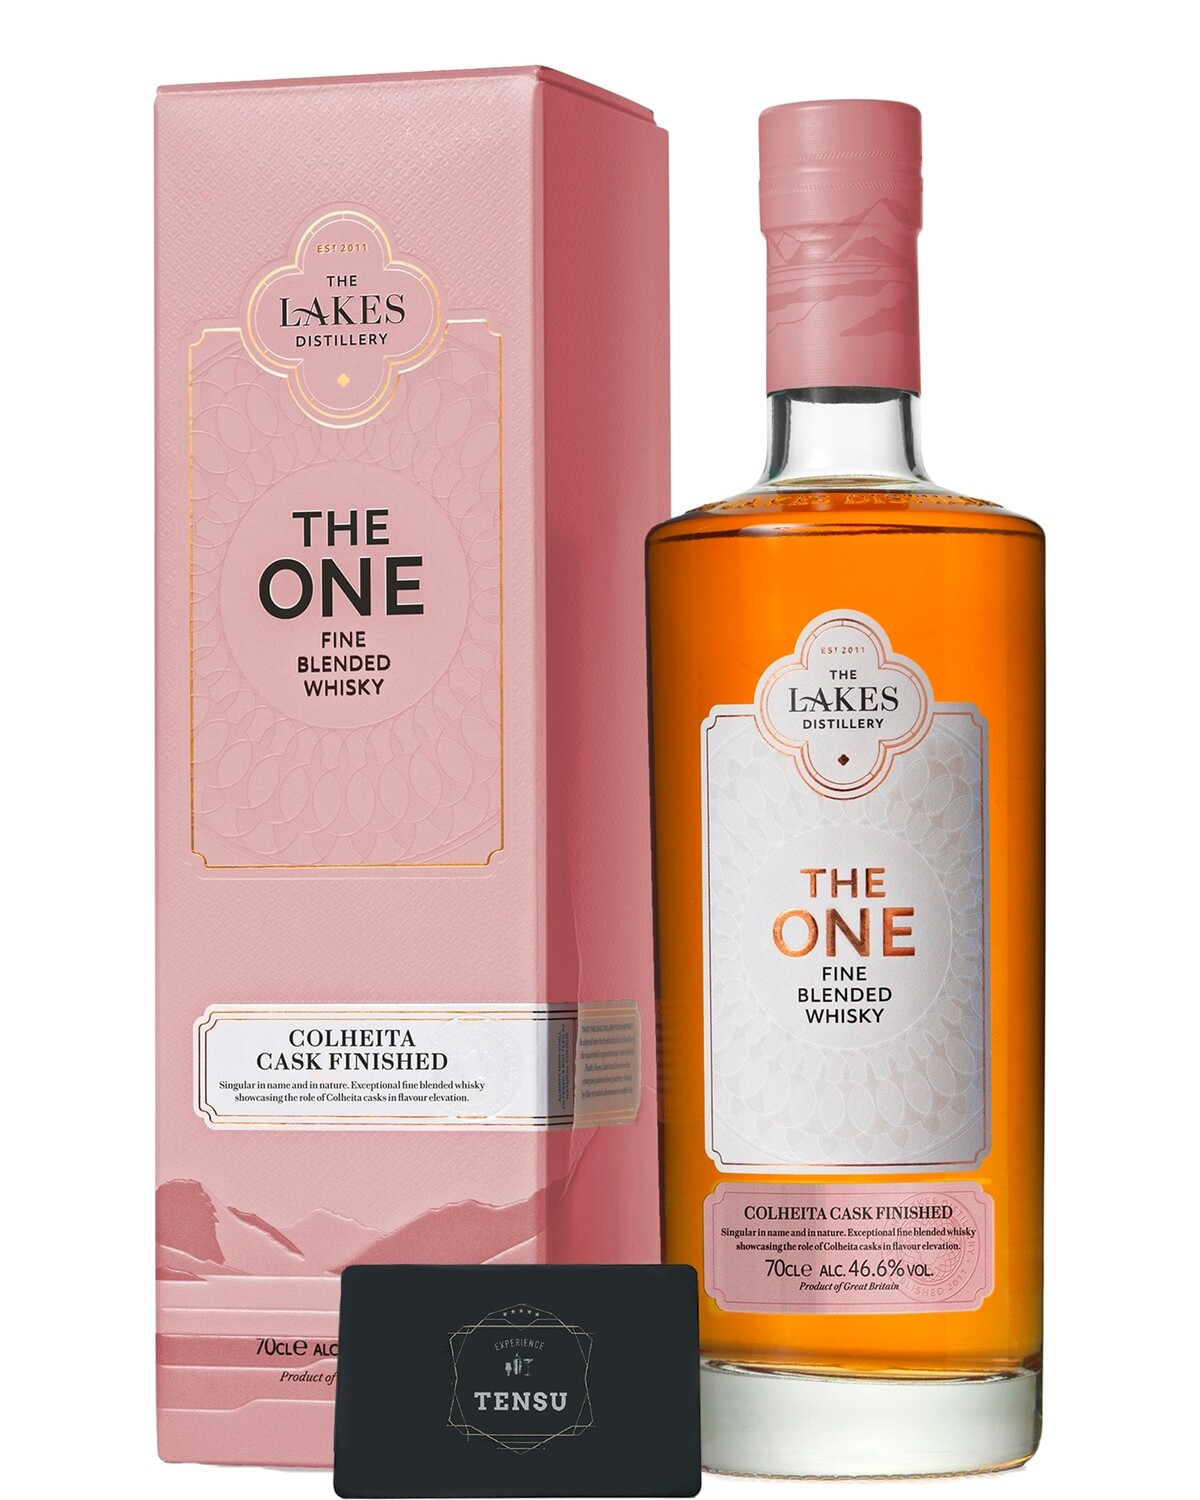 The Lakes - The One (Colheita Cask Finished) 46,6 "The Lakes Distillery"